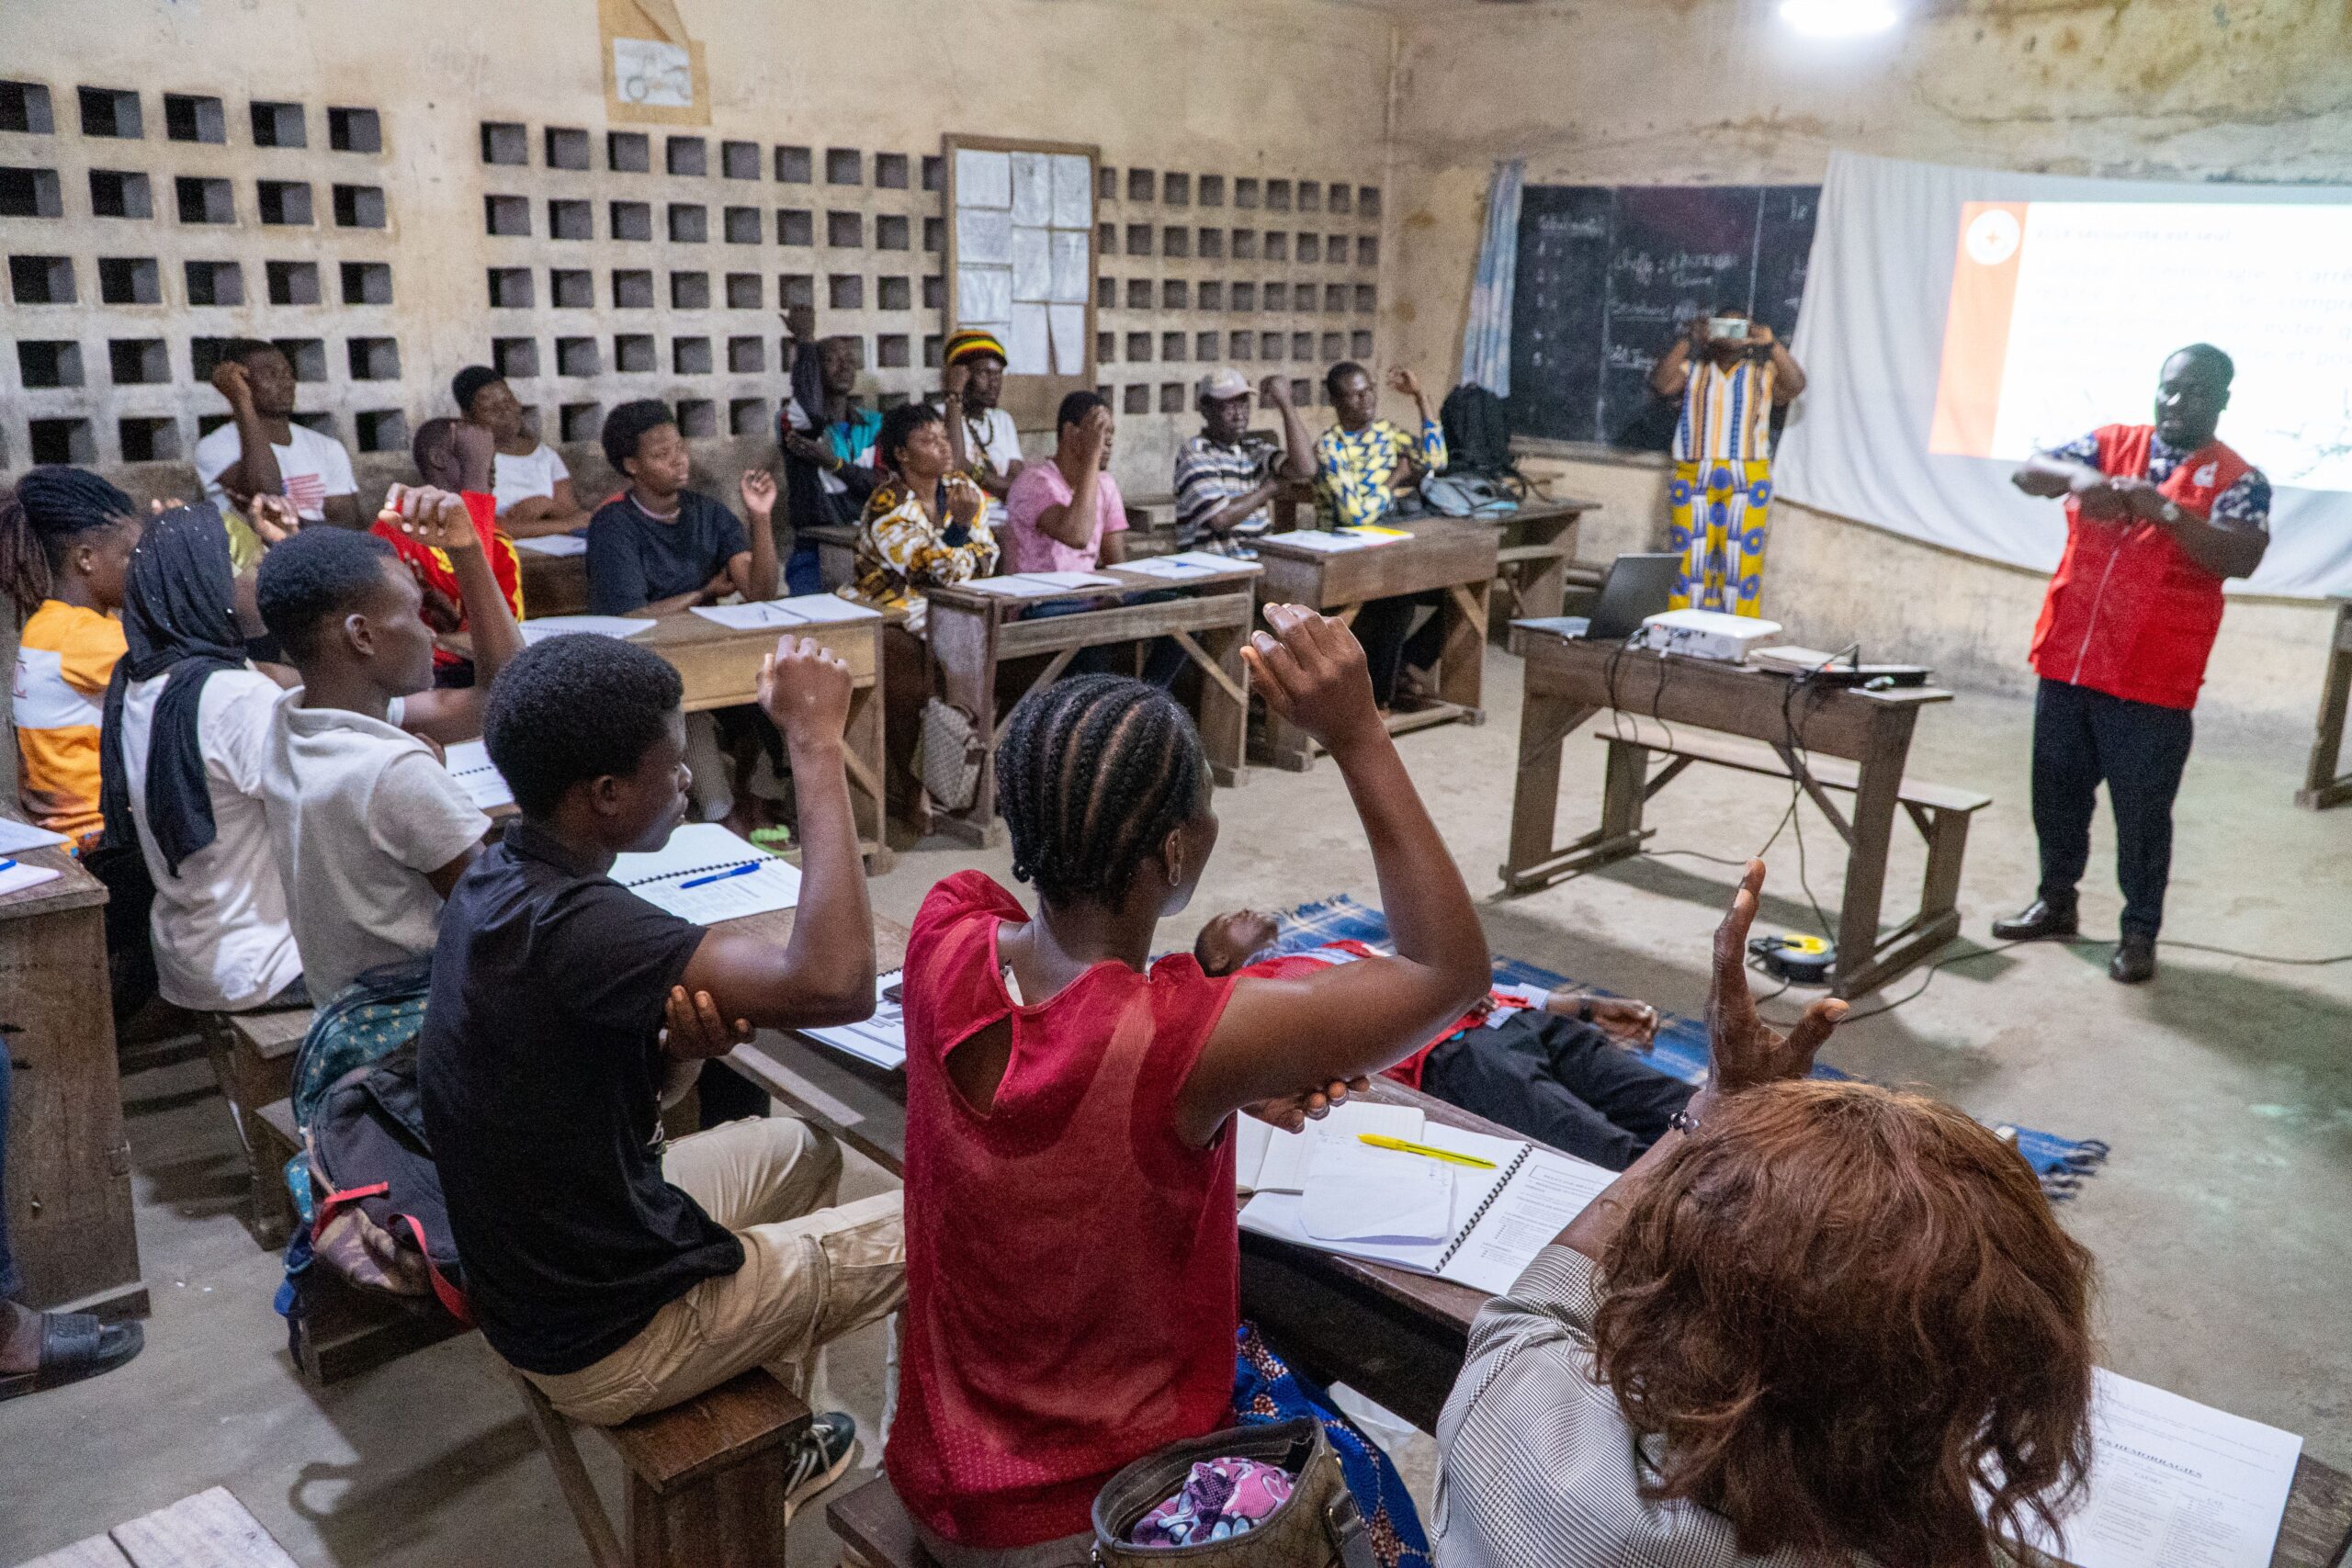 A group of people sitting at desks in a classroom with their hands raised. A Red Cross volunteer stands at the front teaching them first aid skills.